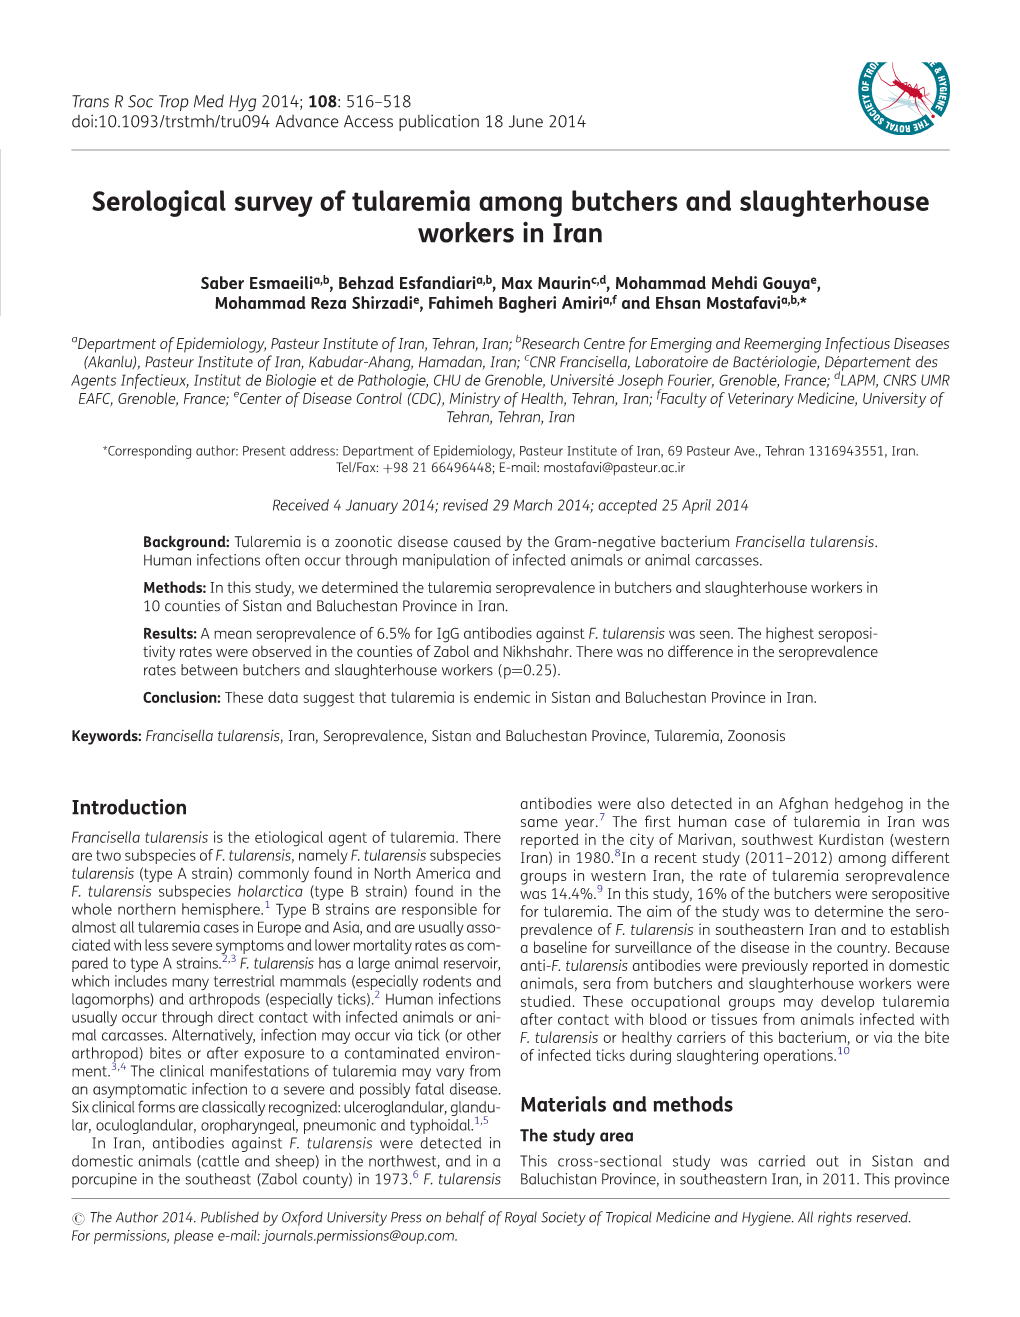 Serological Survey of Tularemia Among Butchers and Slaughterhouse Workers in Iran